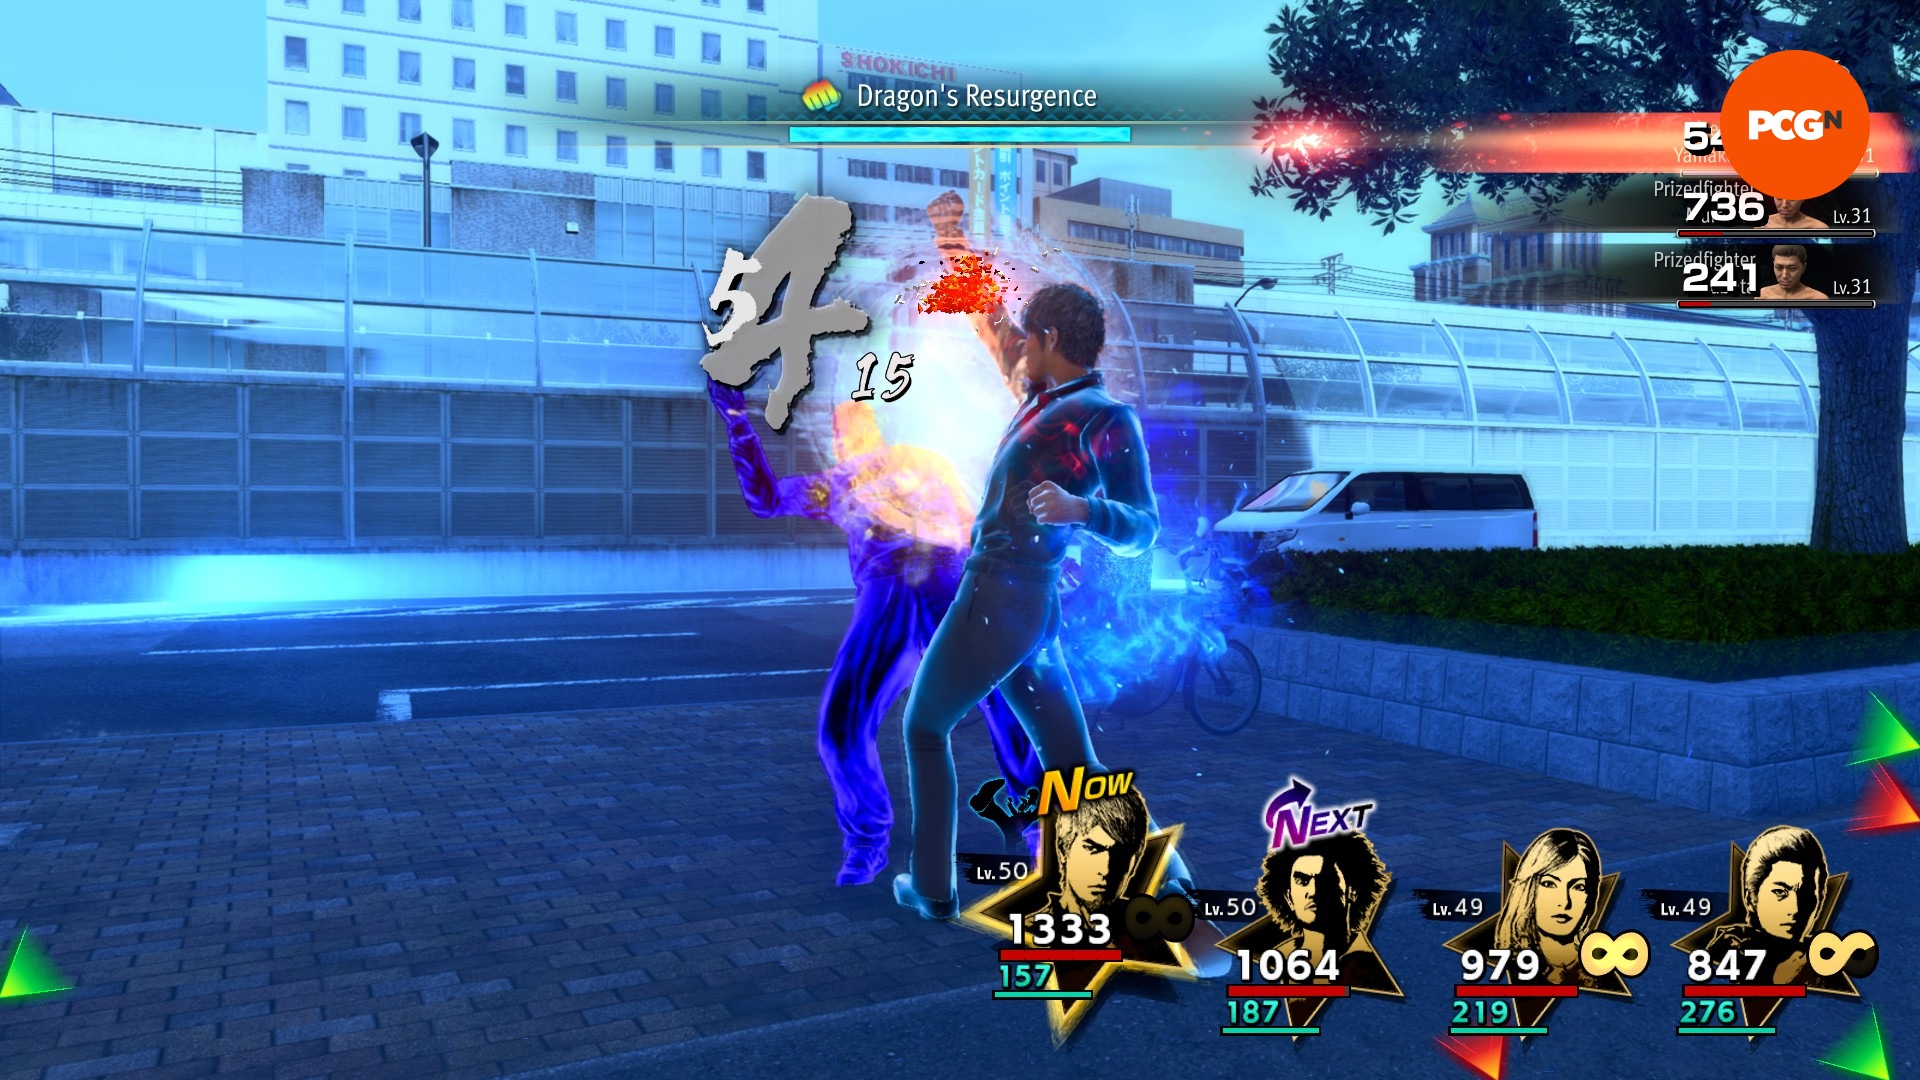 Kiryu uses his unique Dragon’s Resurgence ability to break the rules and attack enemies in real-time combat.